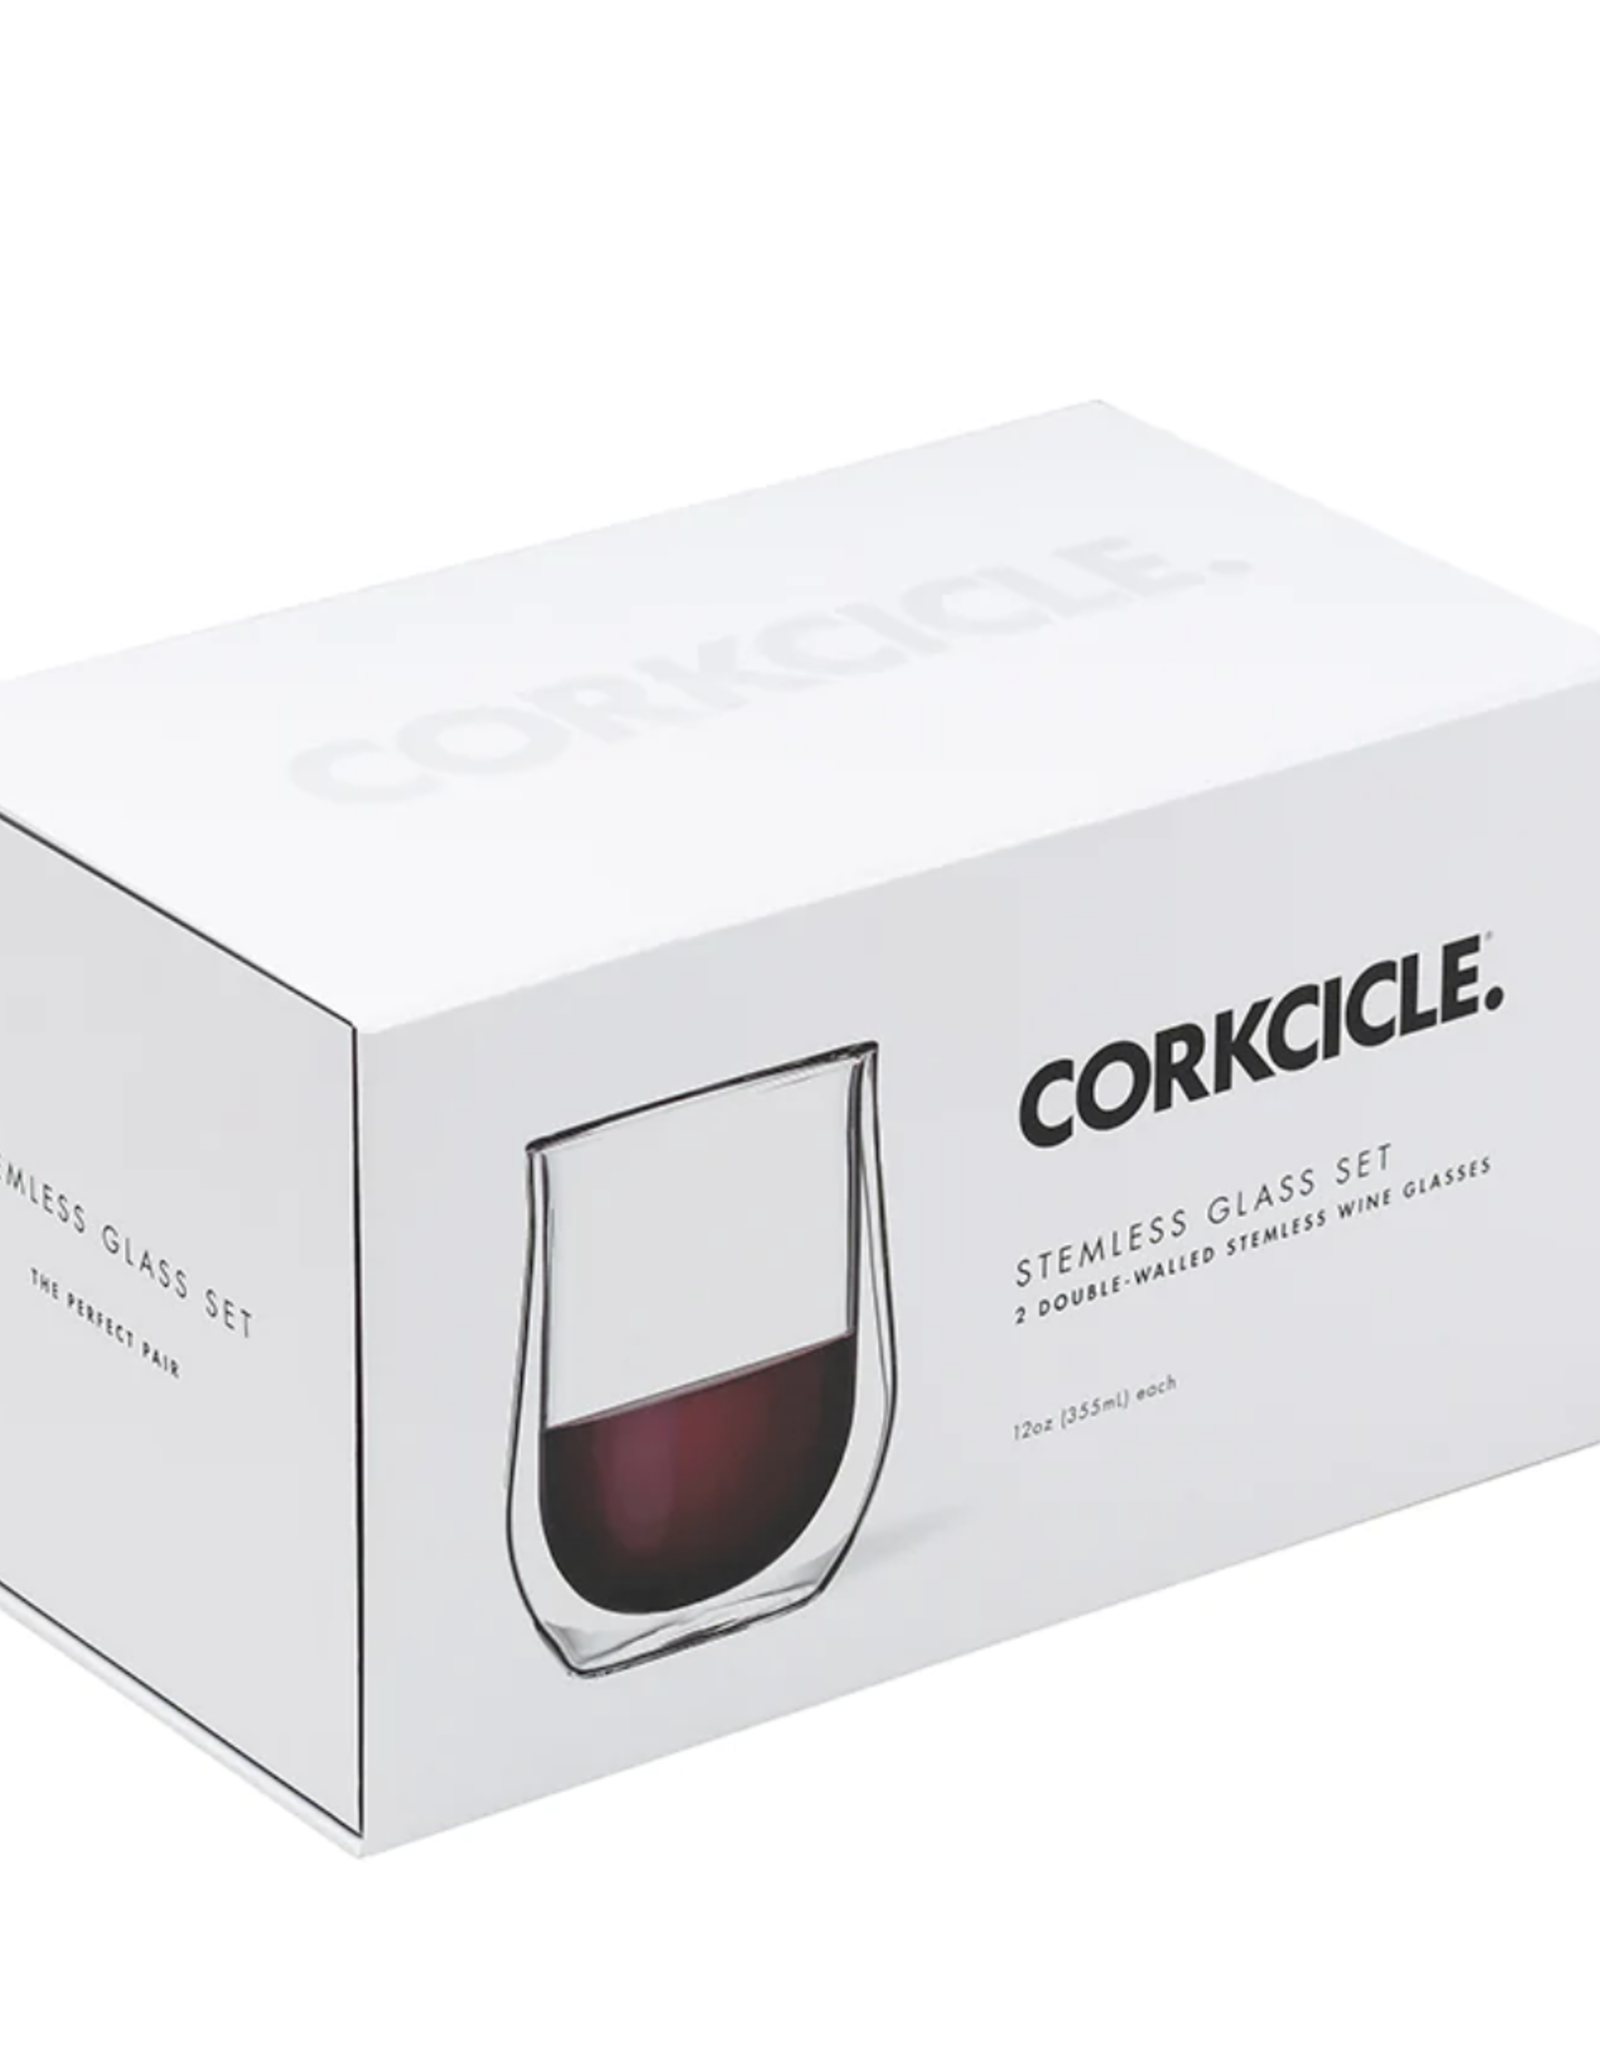 Corkcicle Corkcicle Stemless Double Pack Glass Set